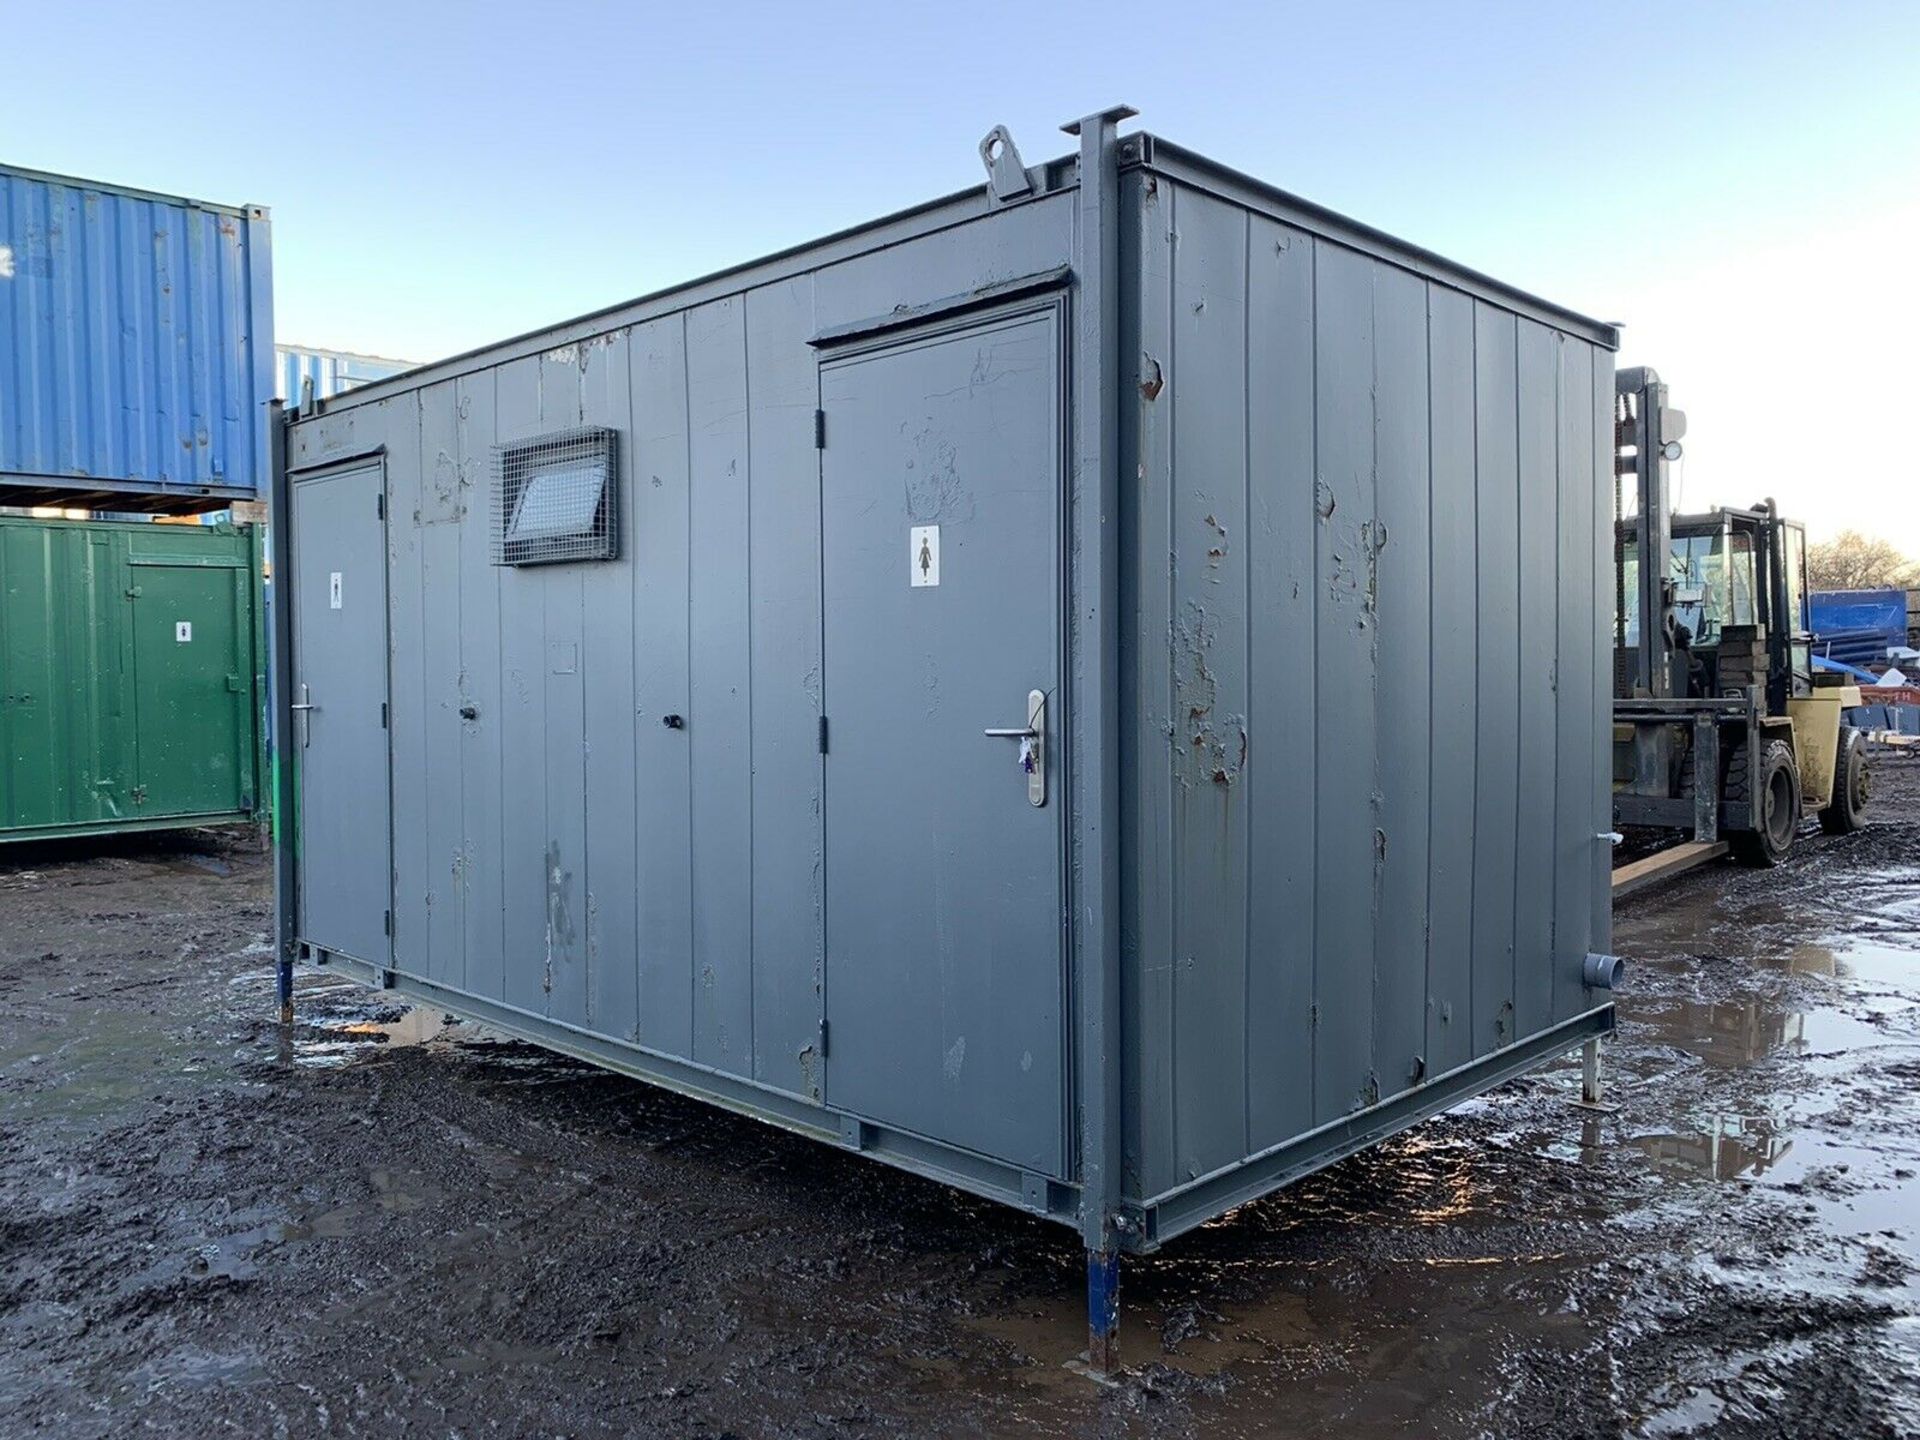 Portable Toilet Block Site Loo Cabin Steel Contain